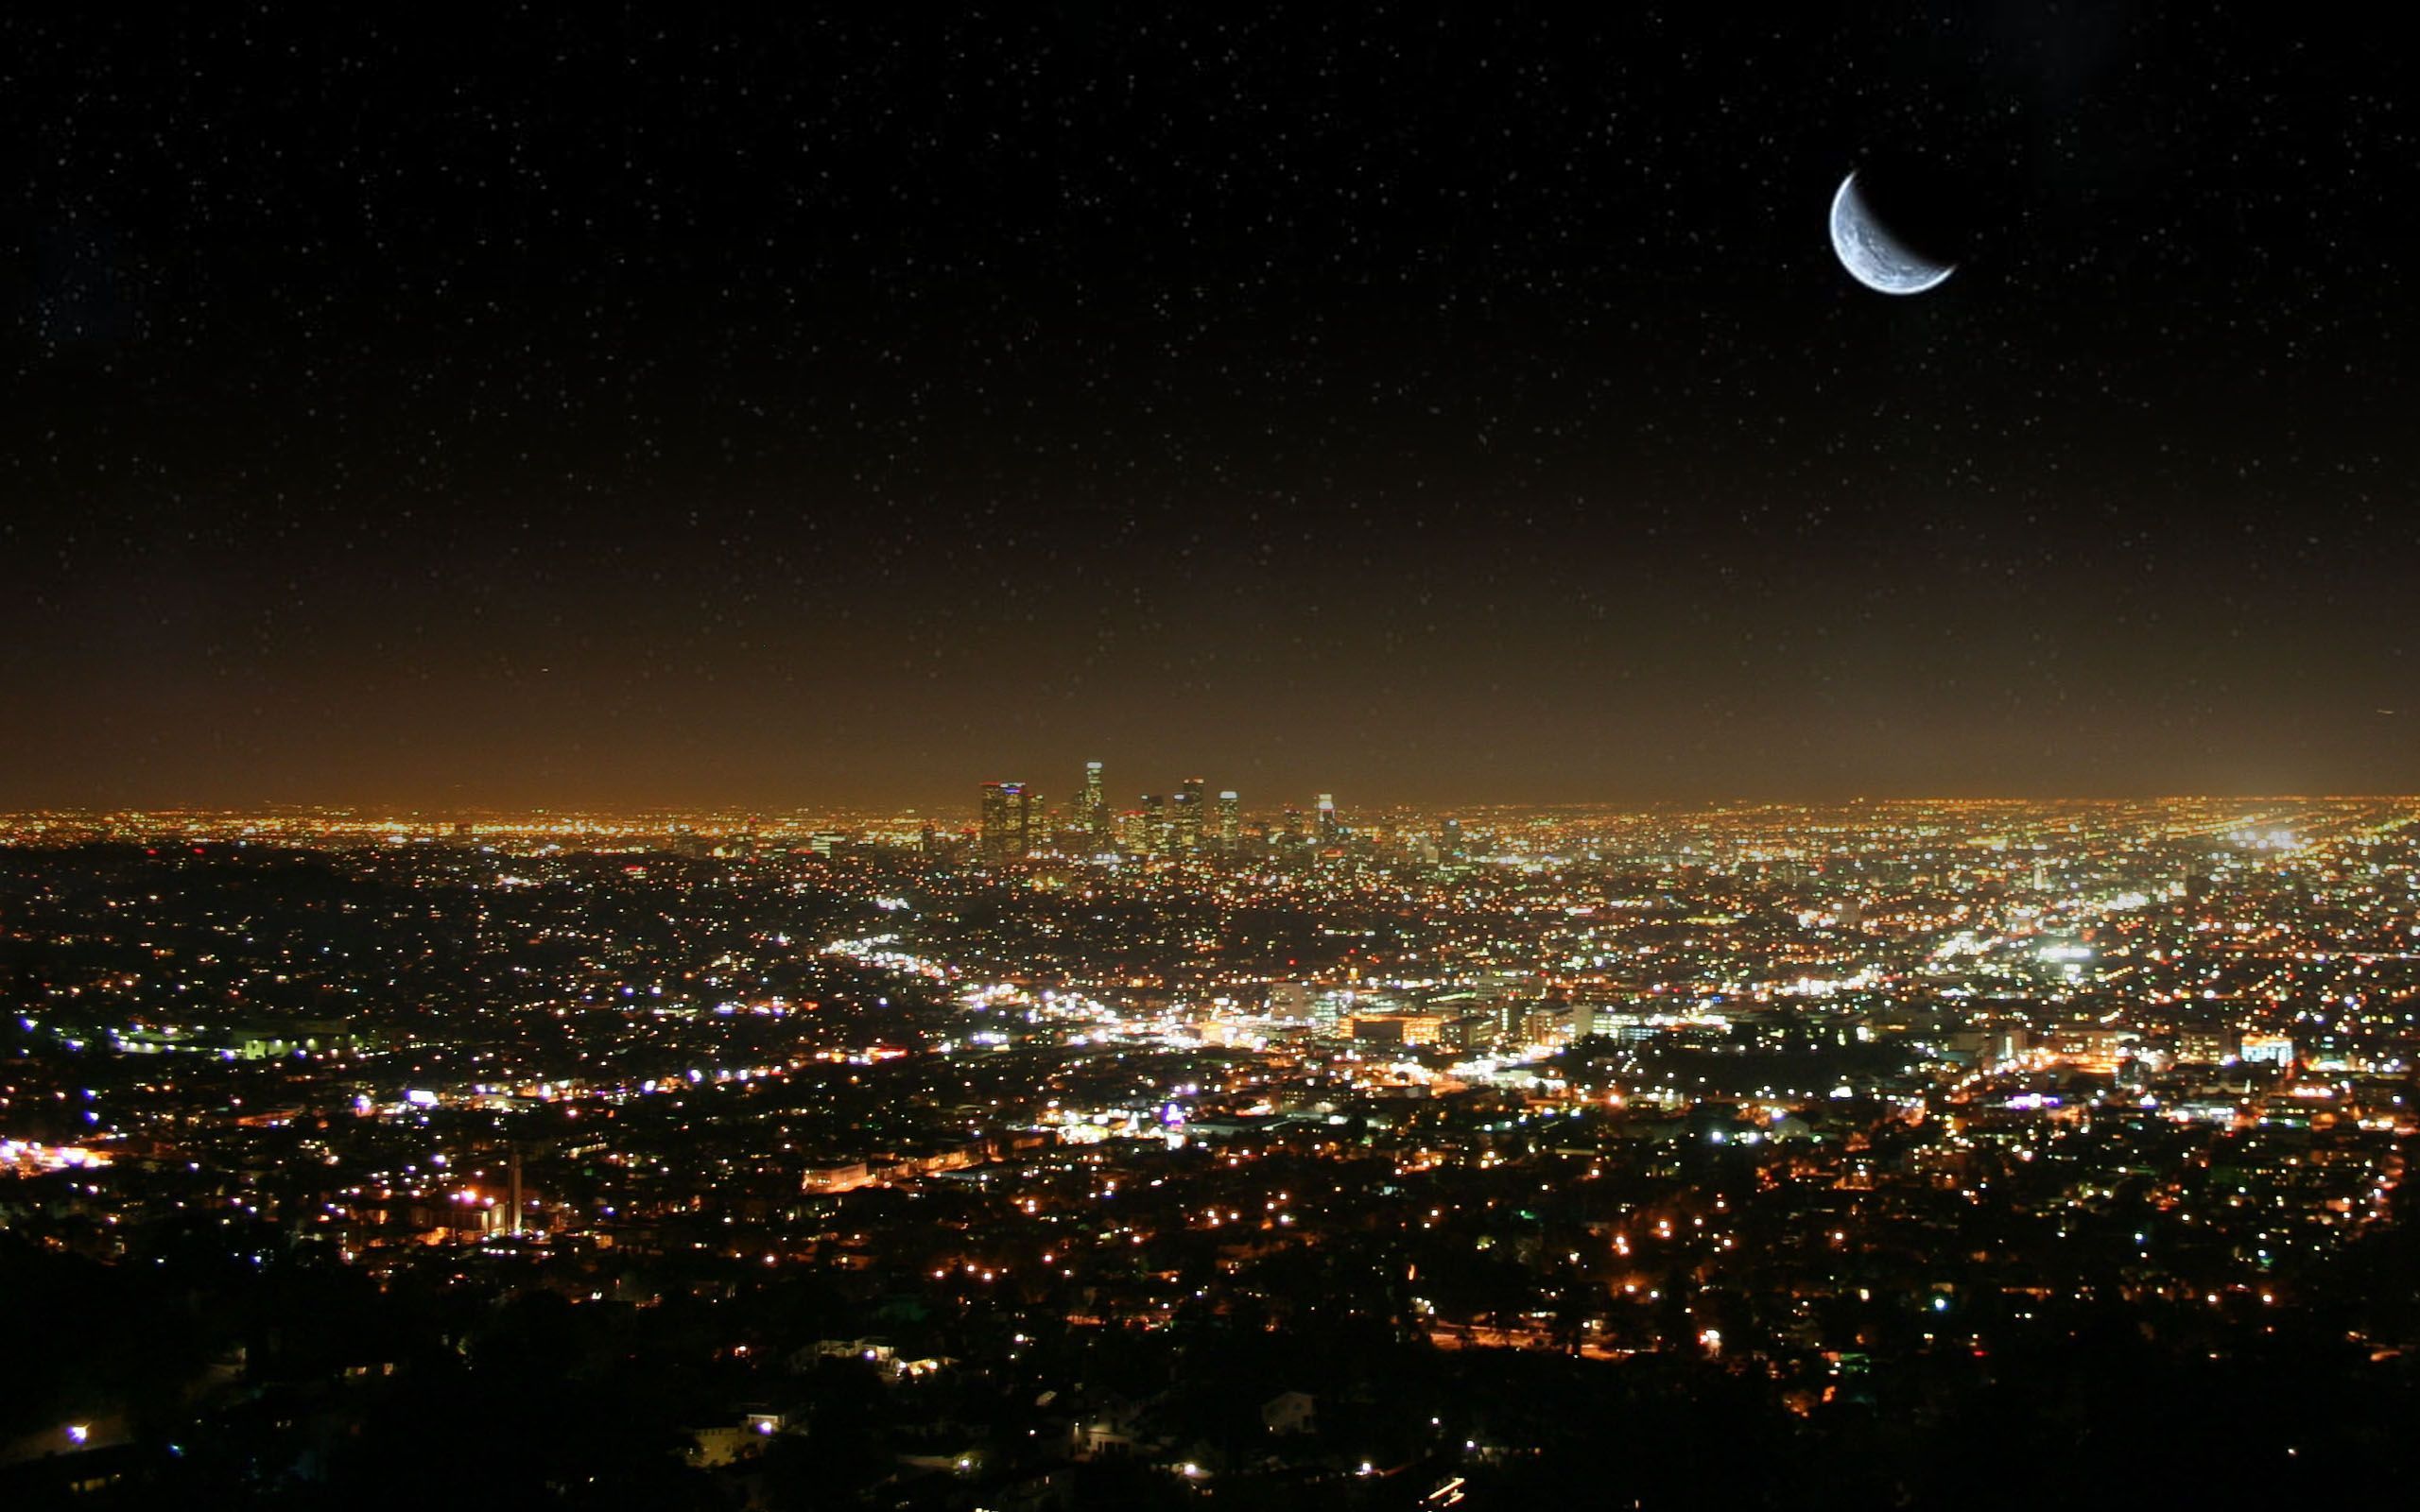 Los Angeles Free Desktop Wallpapers for HD, Widescreen and other